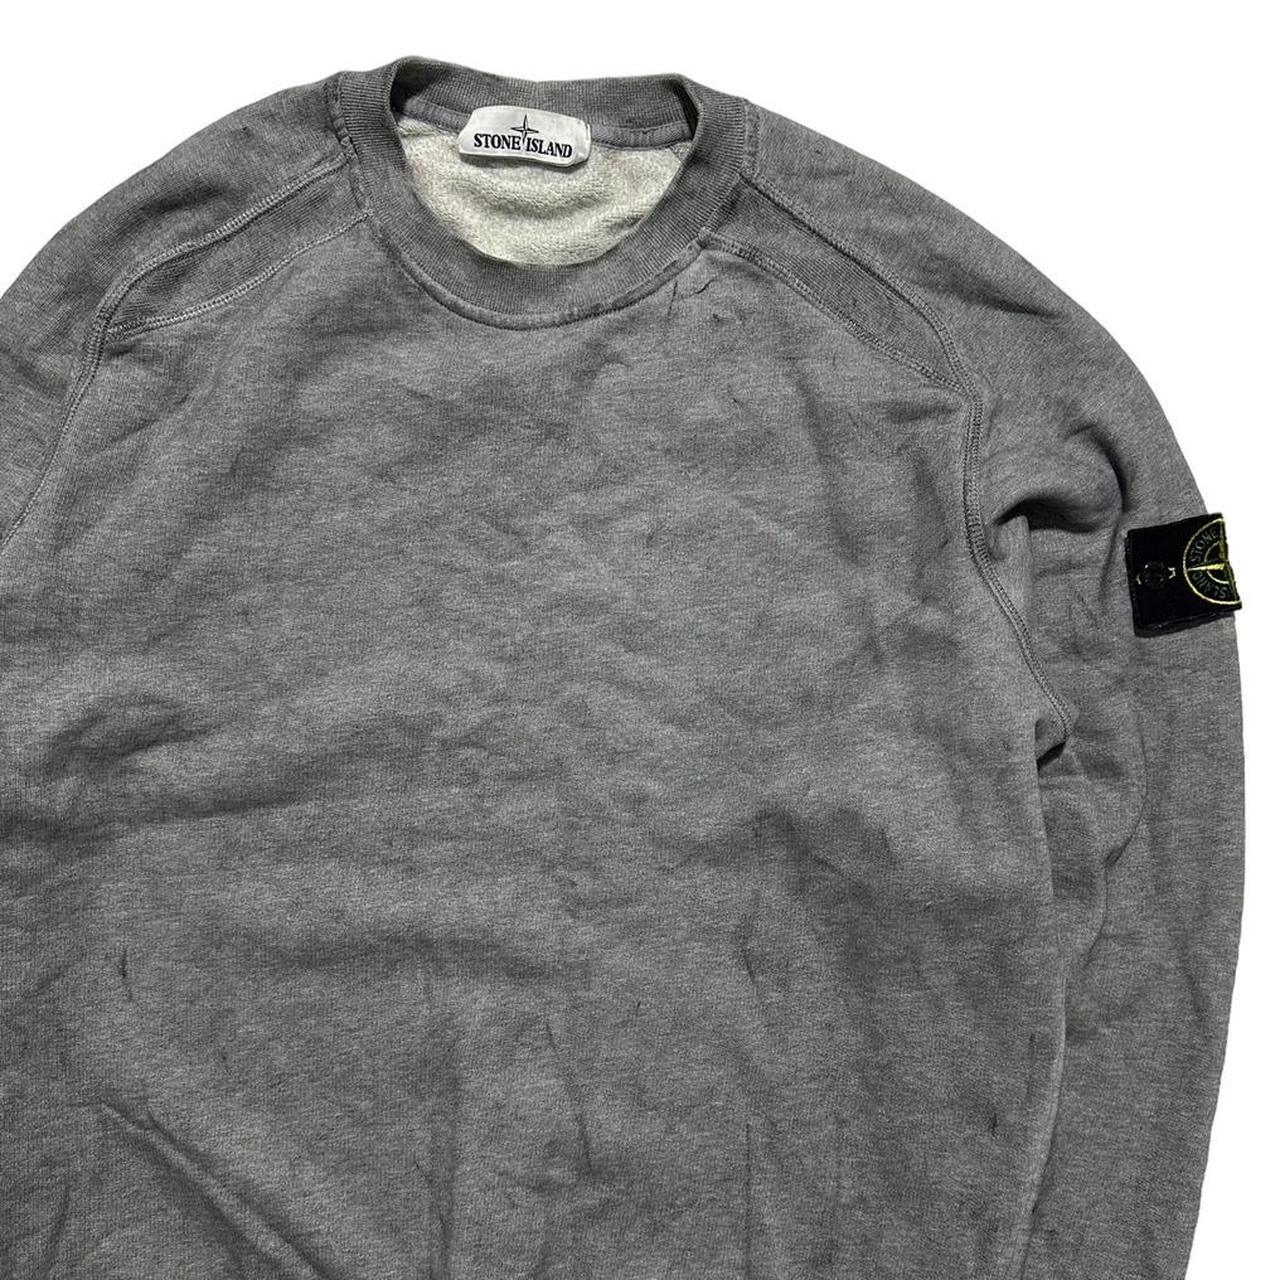 Stone Island Grey Dust Treatment Pullover Crewneck - Known Source